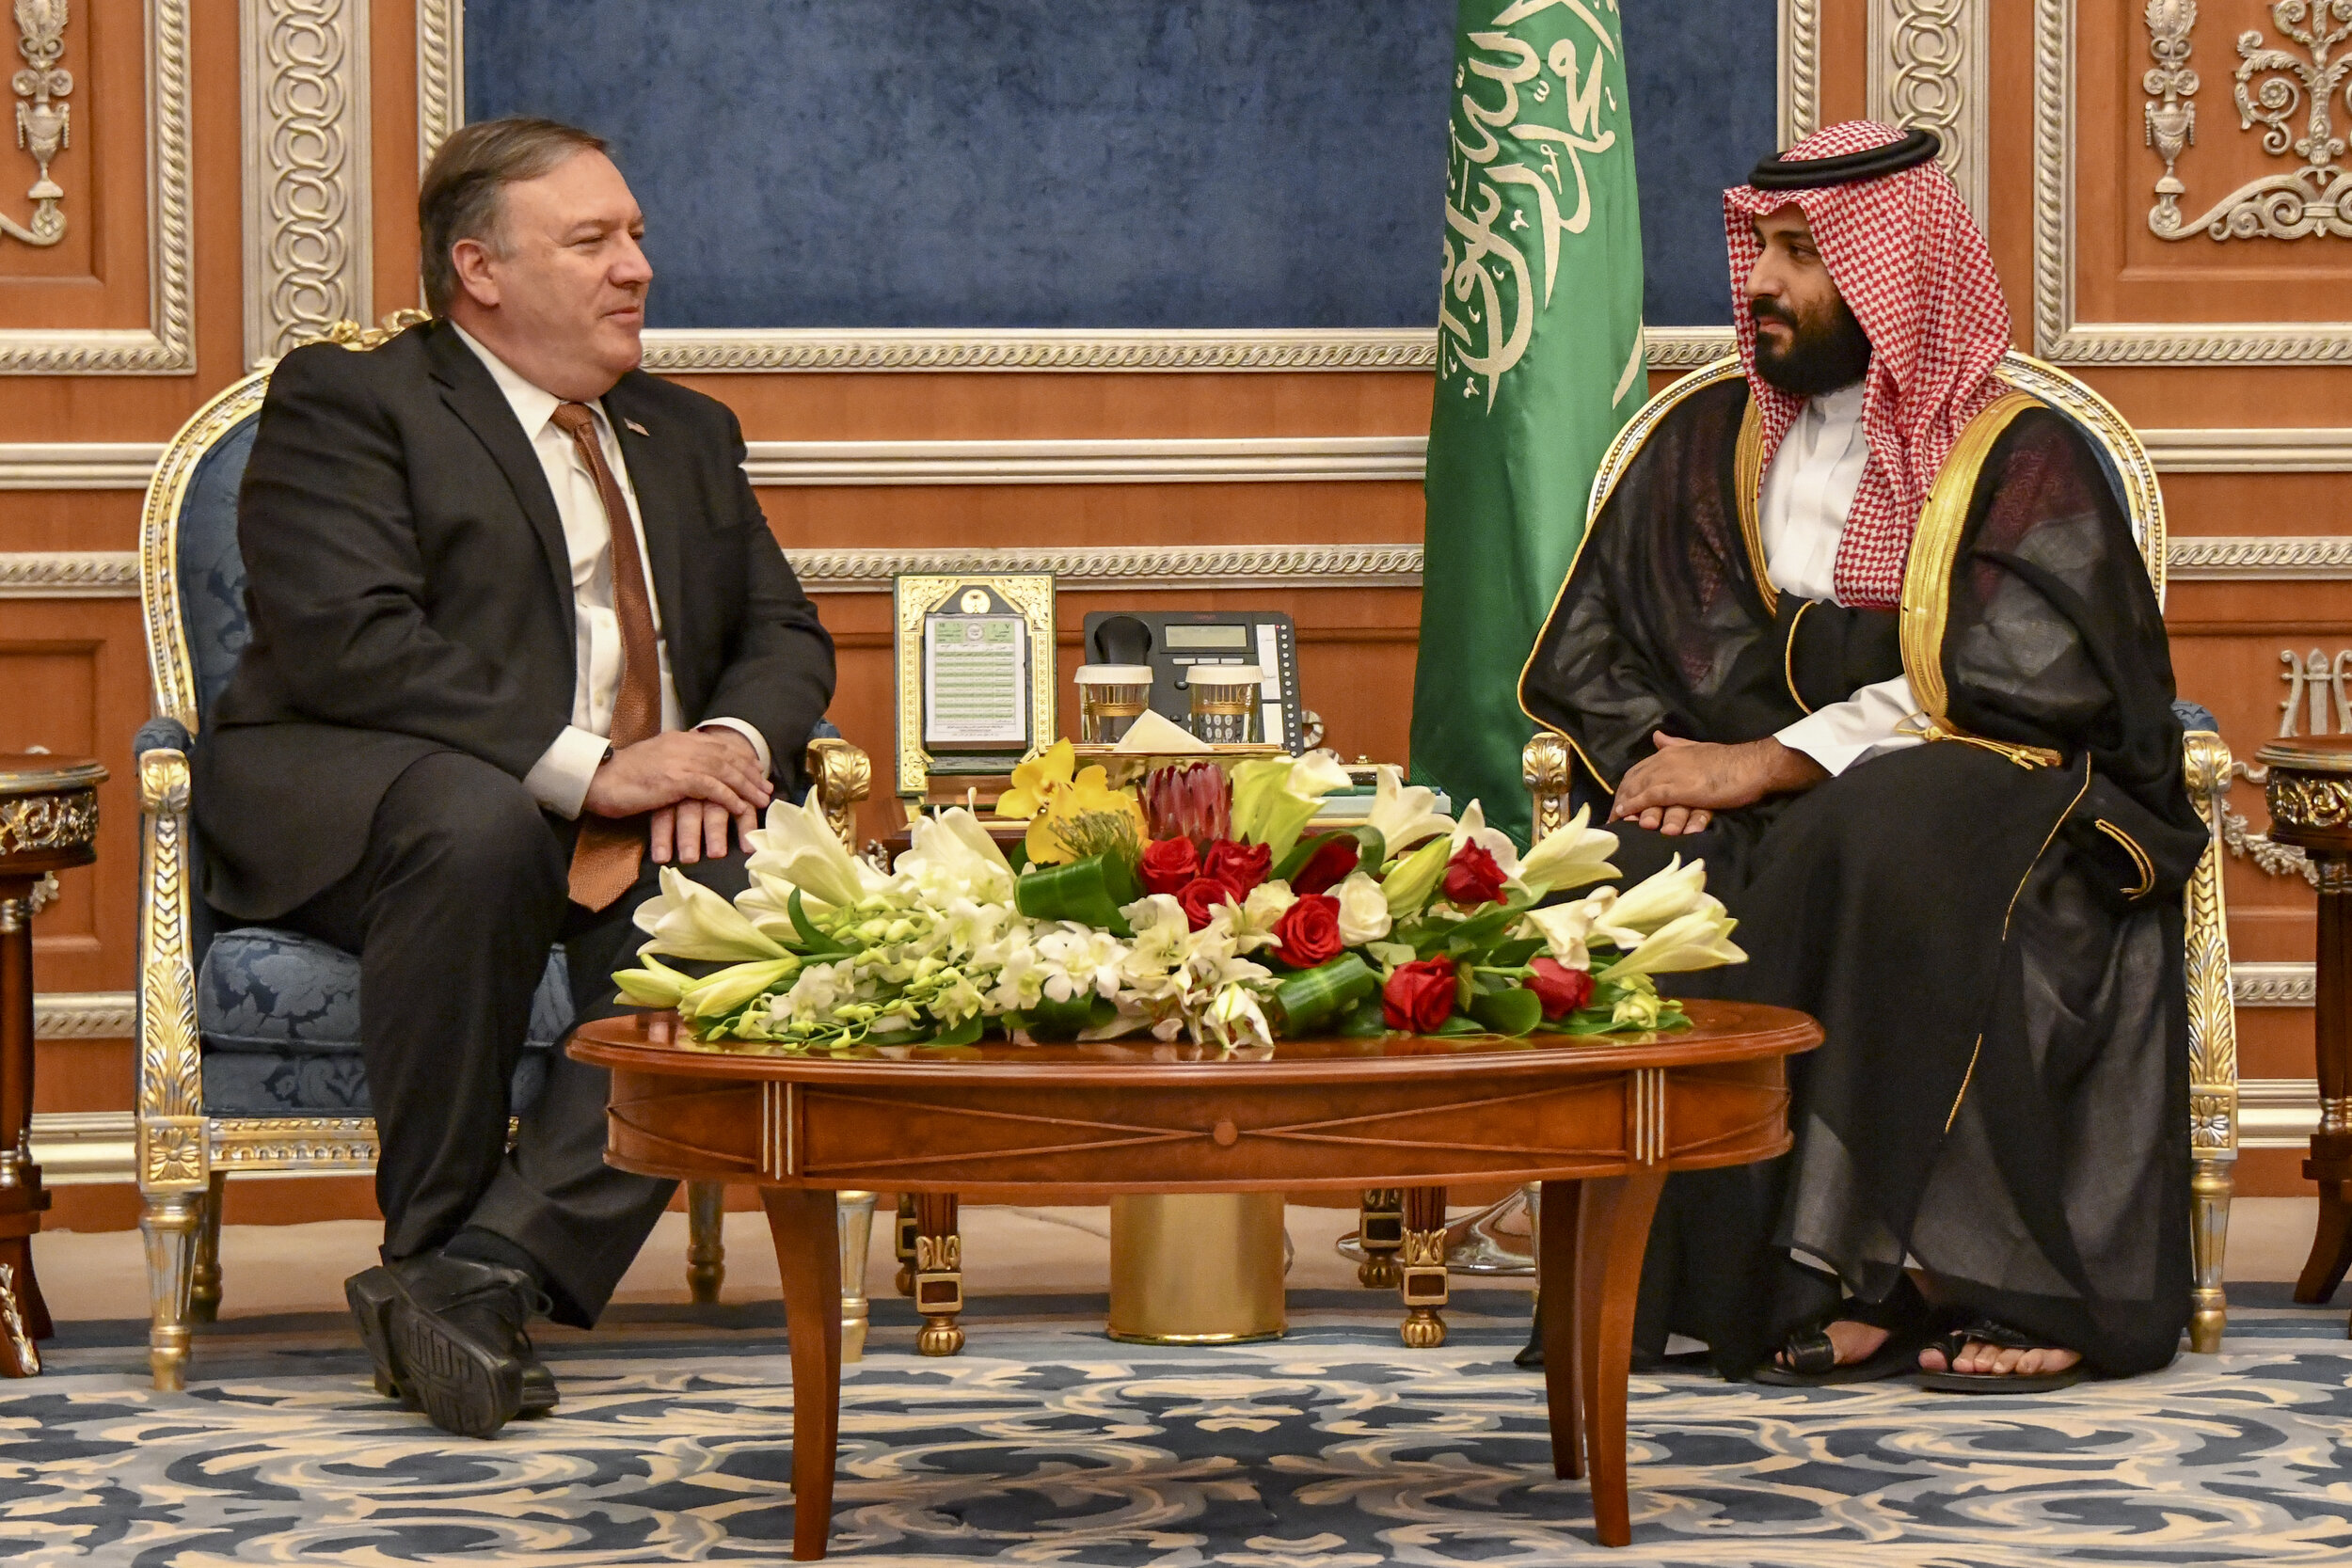 PICTURED: former-Sec. of State Mike Pompeo, principal guarantor of arms and designator of the Houthis as terrorists, meets with Saudi Crown Prince Mohammad Bin Salman, orchestrator of the war plan which involves heavily targeting civilian food and w…